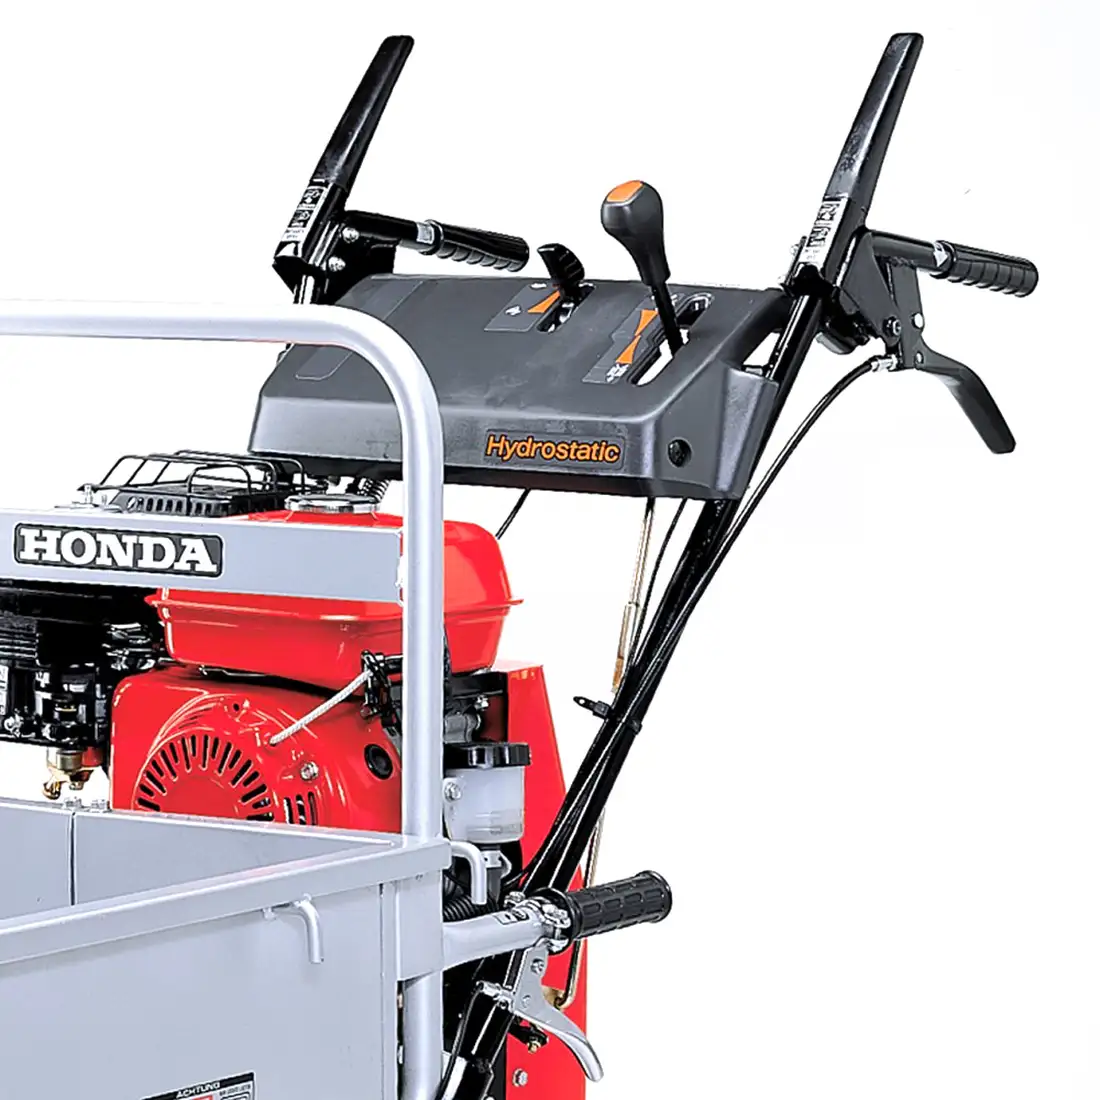 Honda HP 500 Power Carrier With Bed